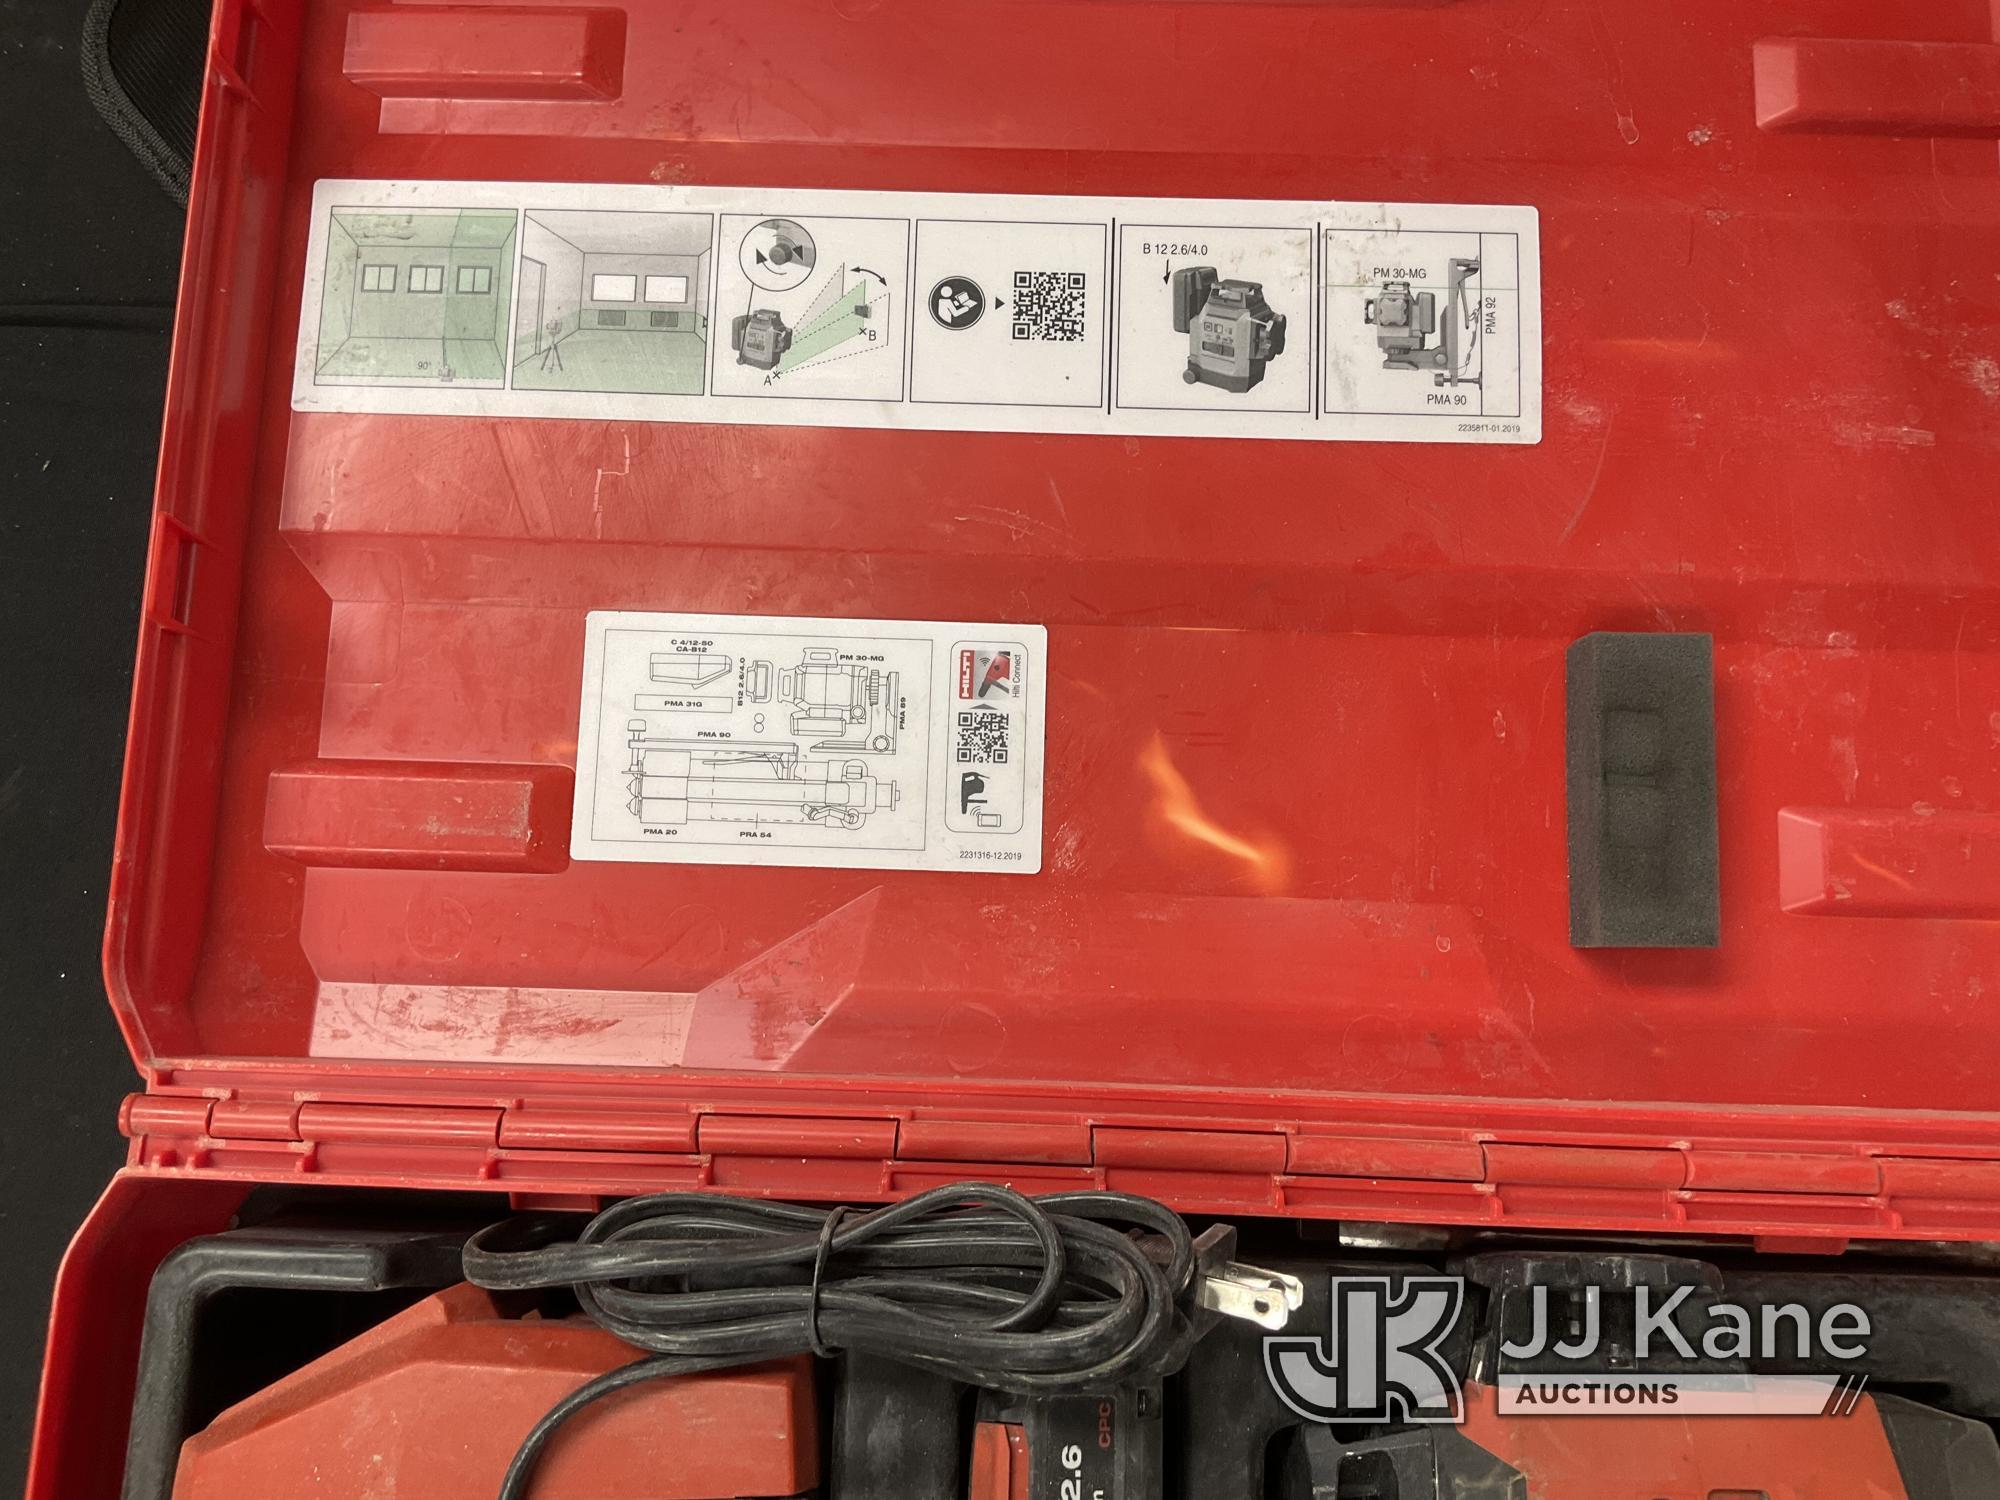 (Jurupa Valley, CA) Hilti PM 30-MG Laser Level (Used) NOTE: This unit is being sold AS IS/WHERE IS v